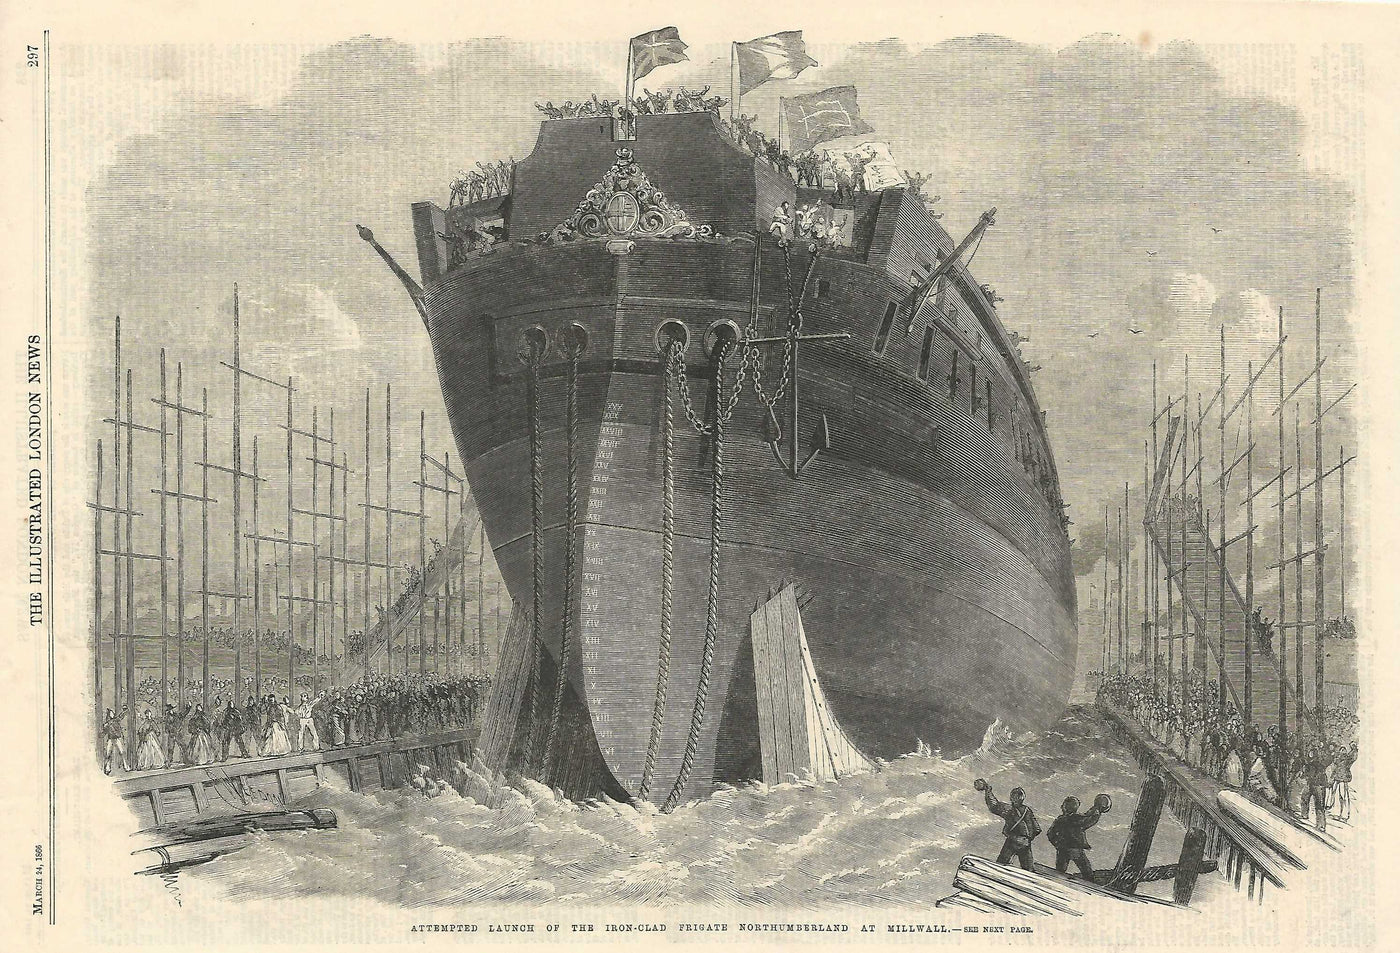 HMS Northumberland launch at Millwall antique print 1866